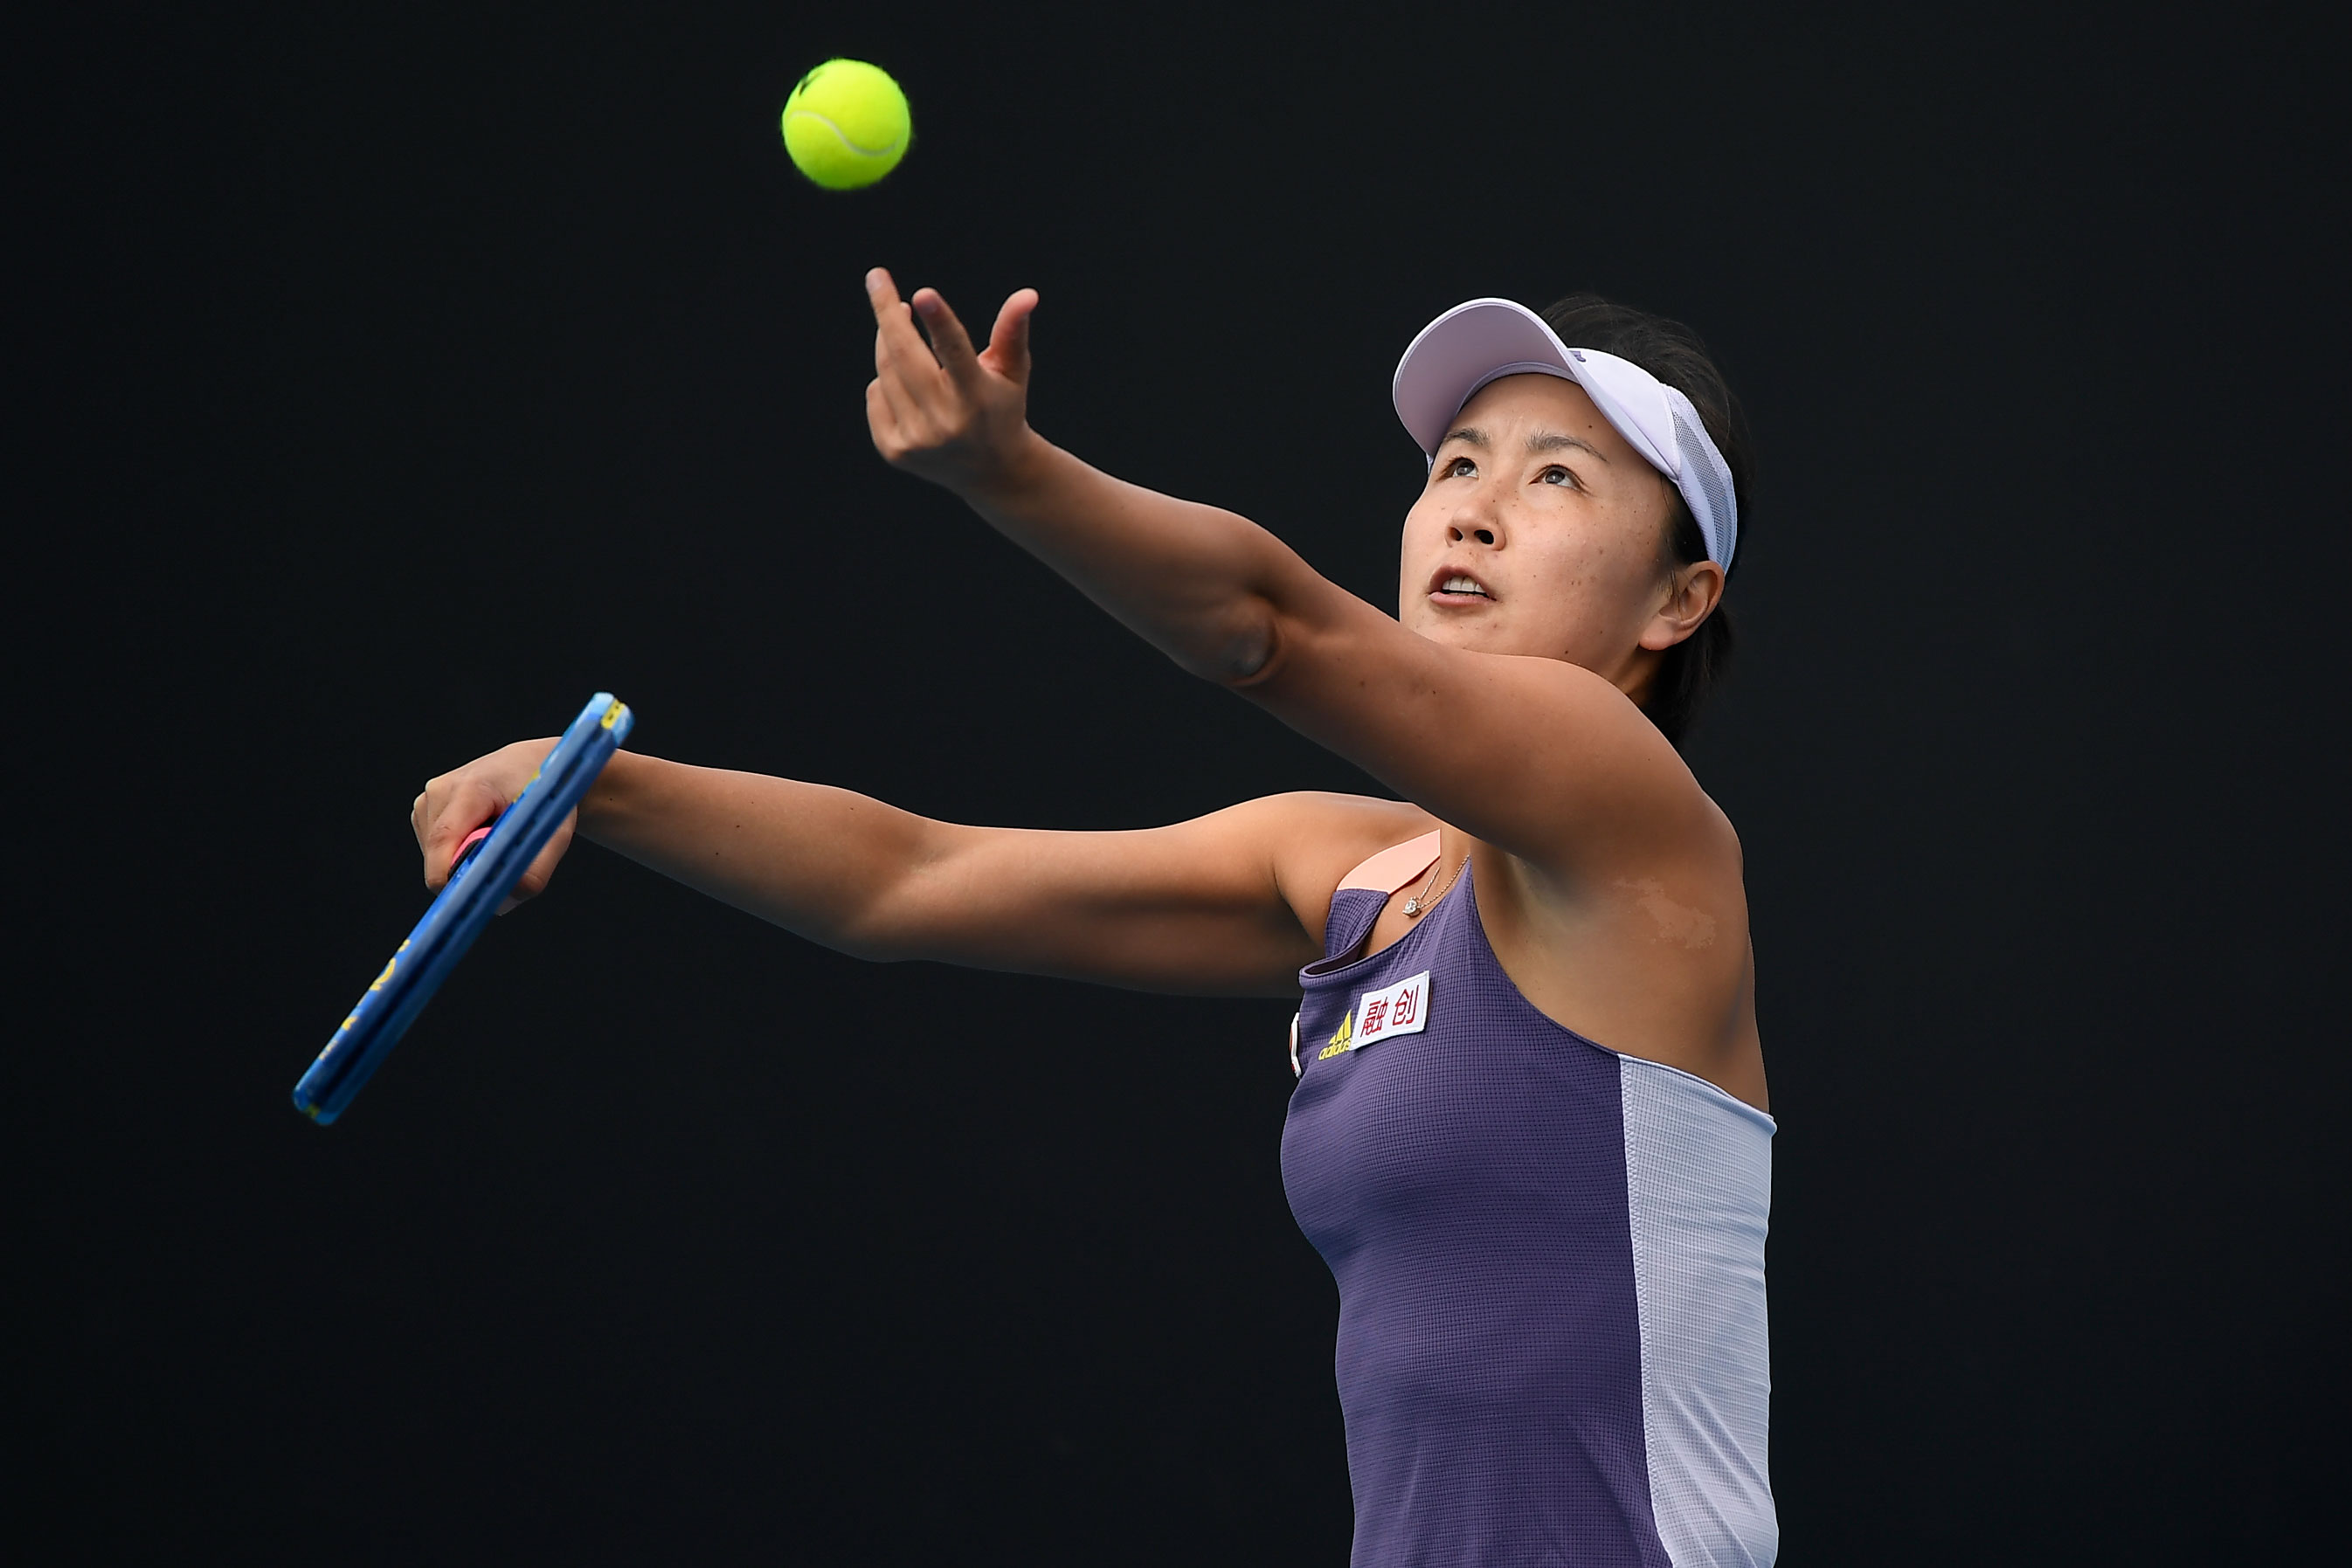 Peng Shuai of China in action during her Women's Singles first round match against Nao Hibino of Japan in the 2020 Australian Open at Melbourne Park on January 21, 2020. 